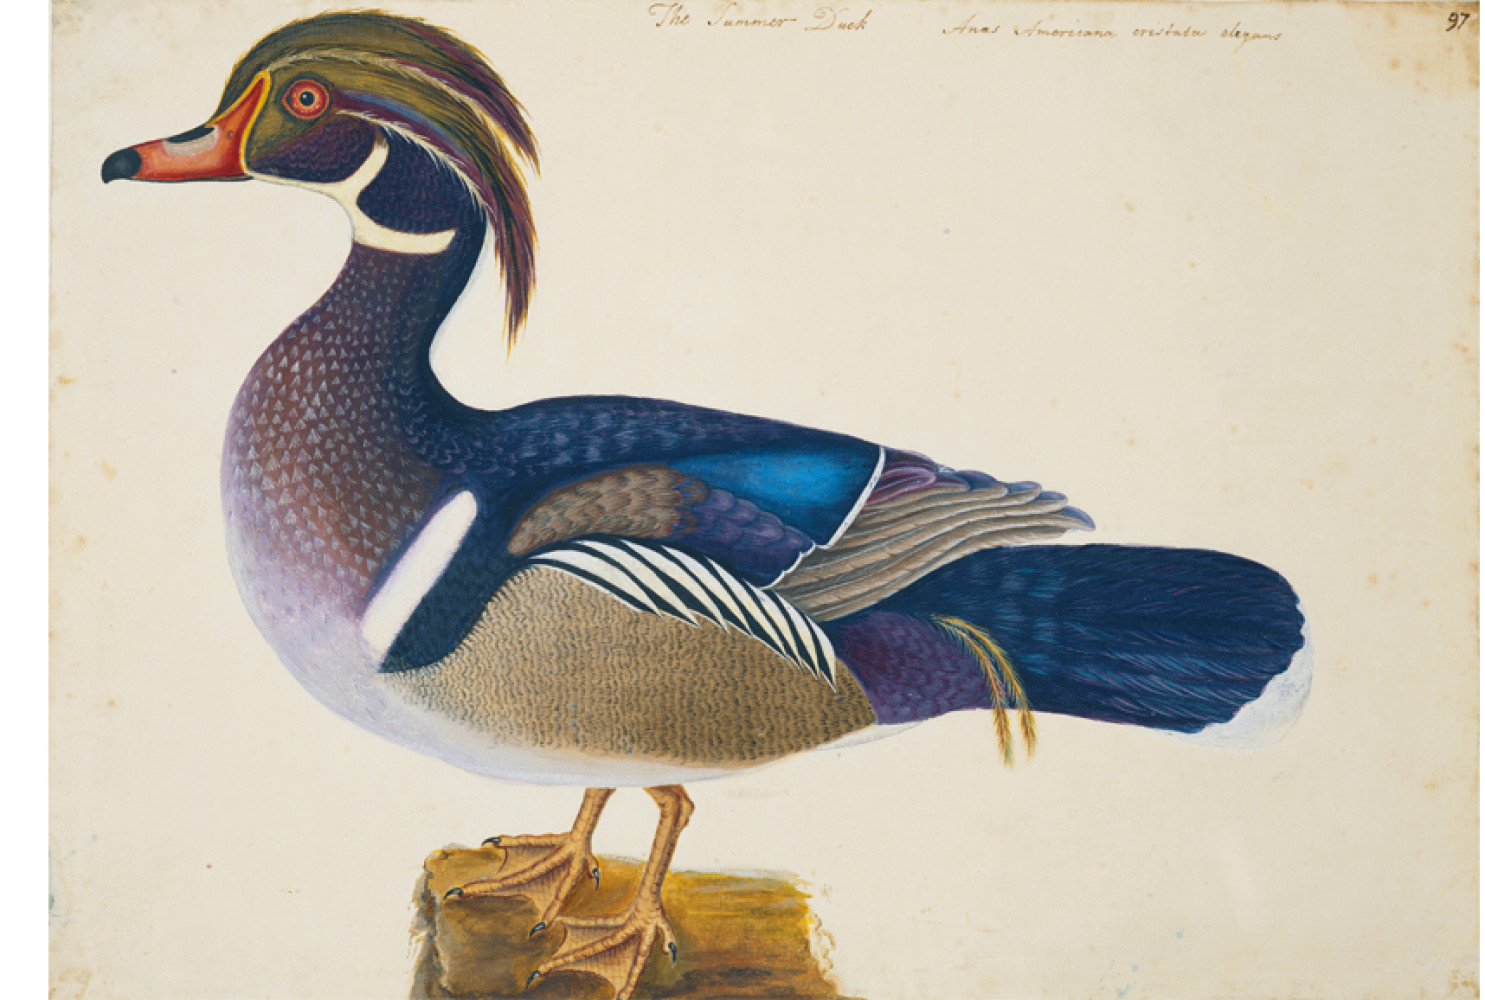 The Summer Duck, ca. 1722-1726, by Mark Catesby (British, 1682-1749); watercolor and bodycolor heightened with gum arabic, over traces of pencil; Royal Collection Trust/© Her Majesty Queen Elizabeth II 2017